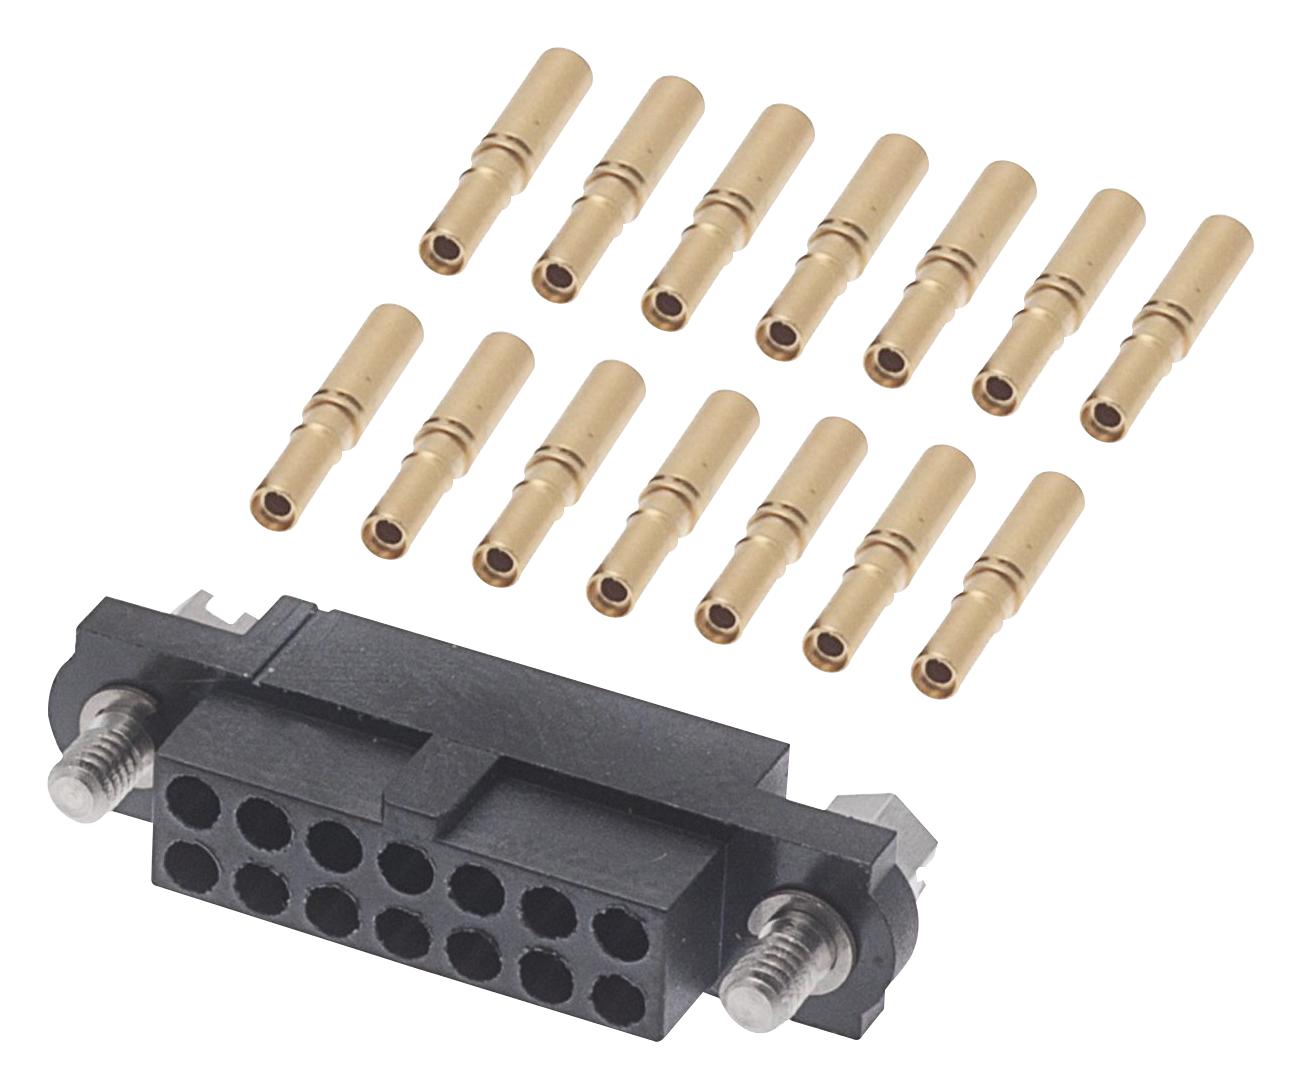 M80-4611405 CONNECTOR, RECEPTACLE, 14POS, 2ROW, 2MM HARWIN